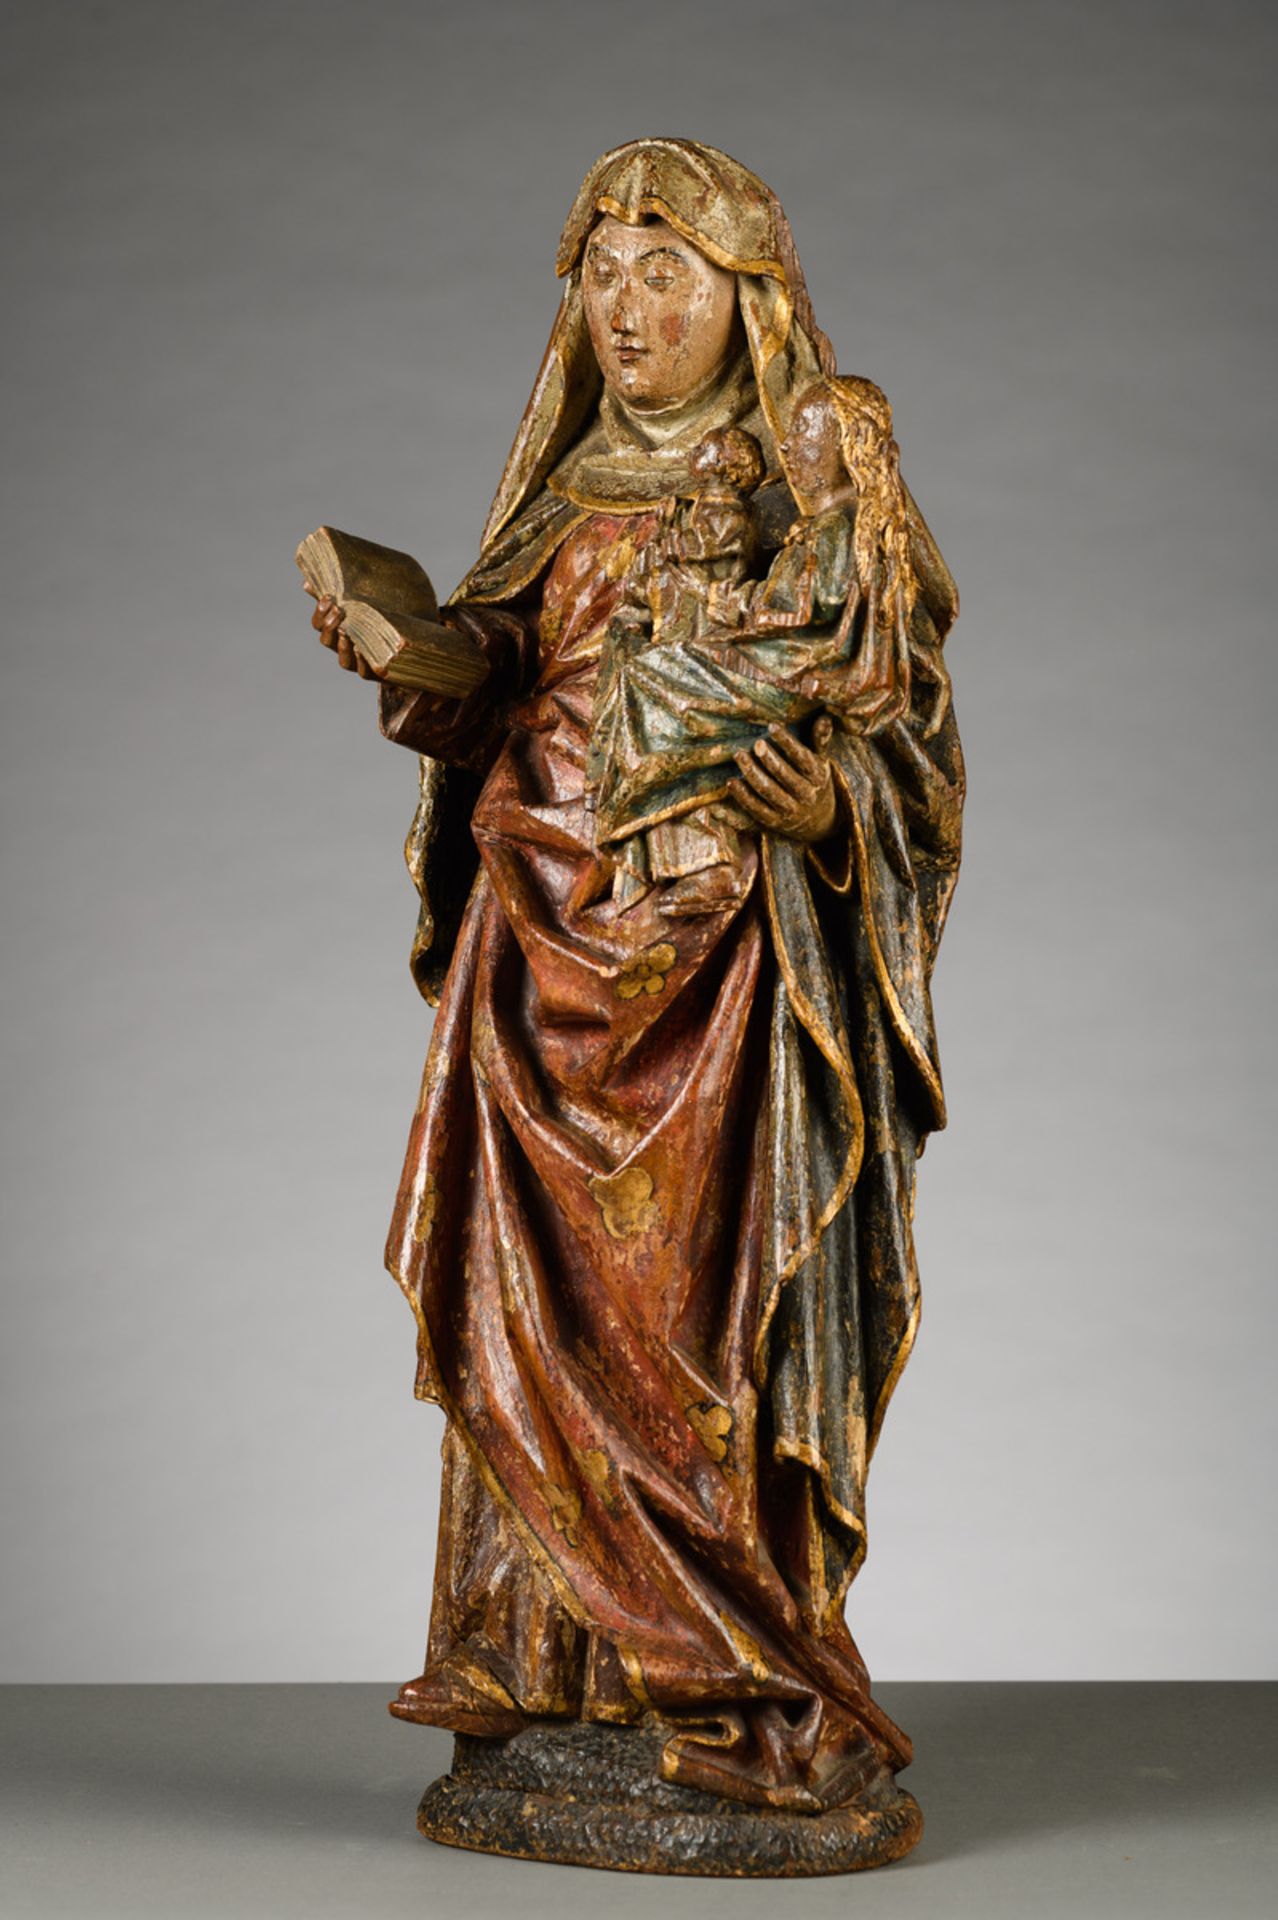 Polychrome wooden statue 'The Virgin and Child with St. Anne' 15th - 16th century (h68cm) - Image 2 of 7